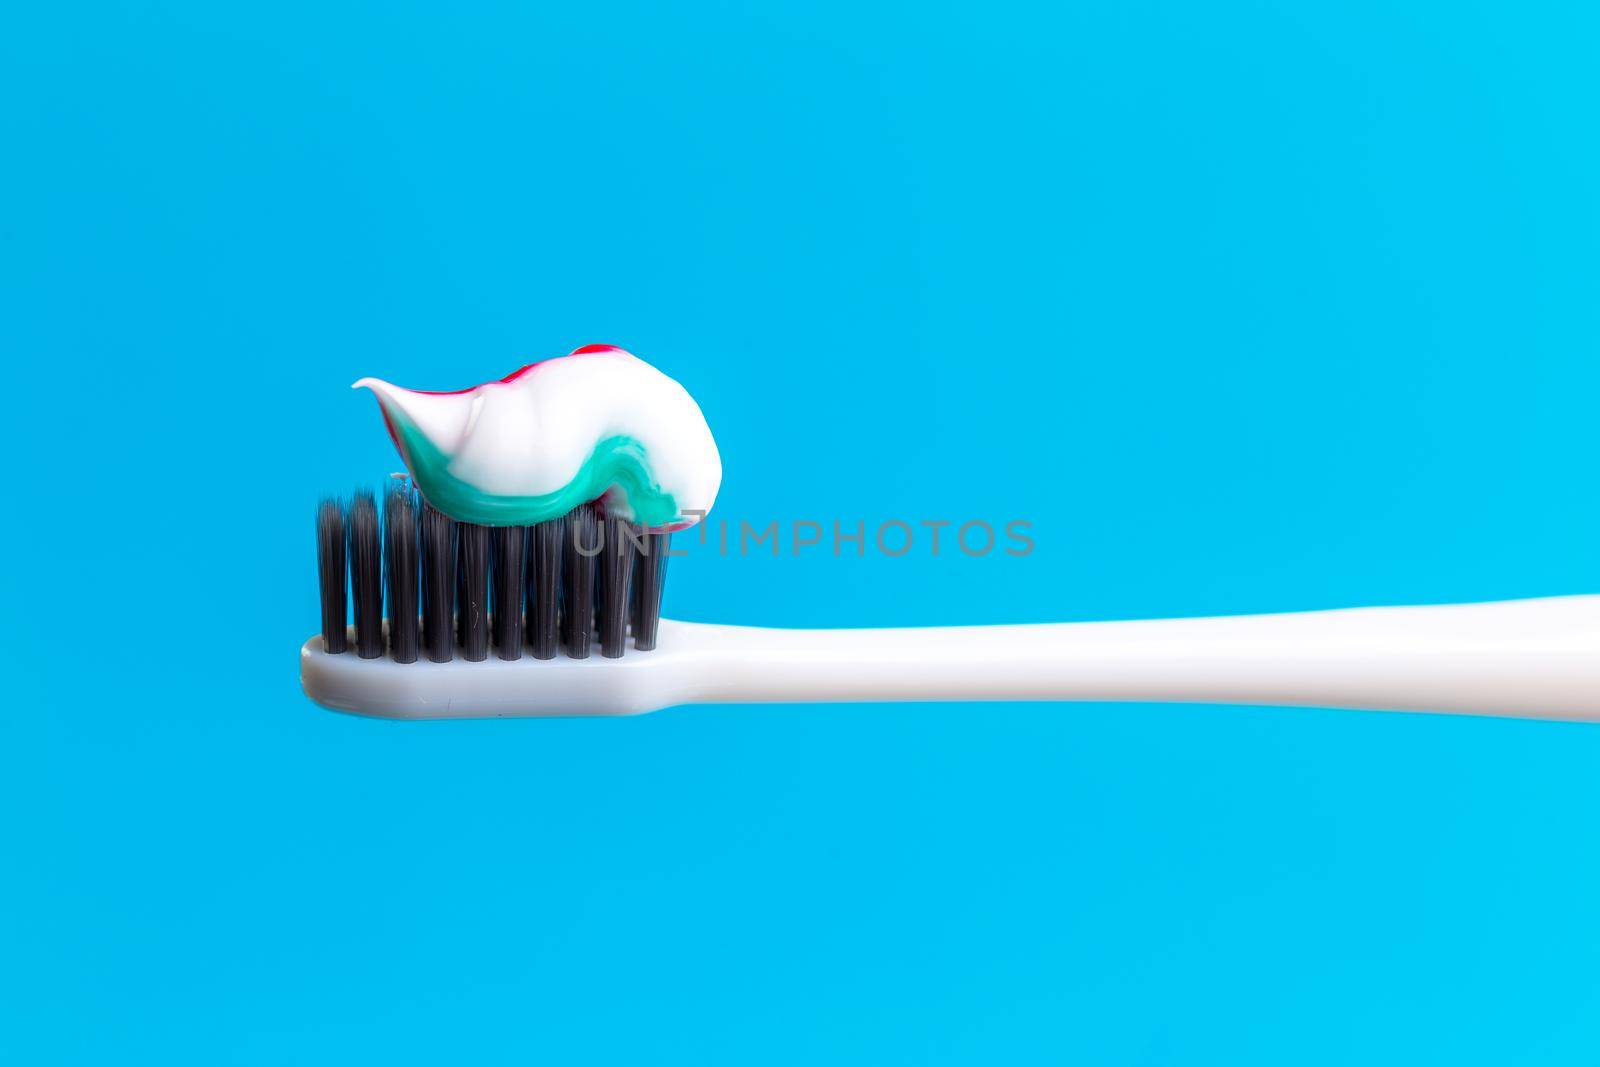 Toothbrush and toothpaste on blue. creative photo by Fabrikasimf